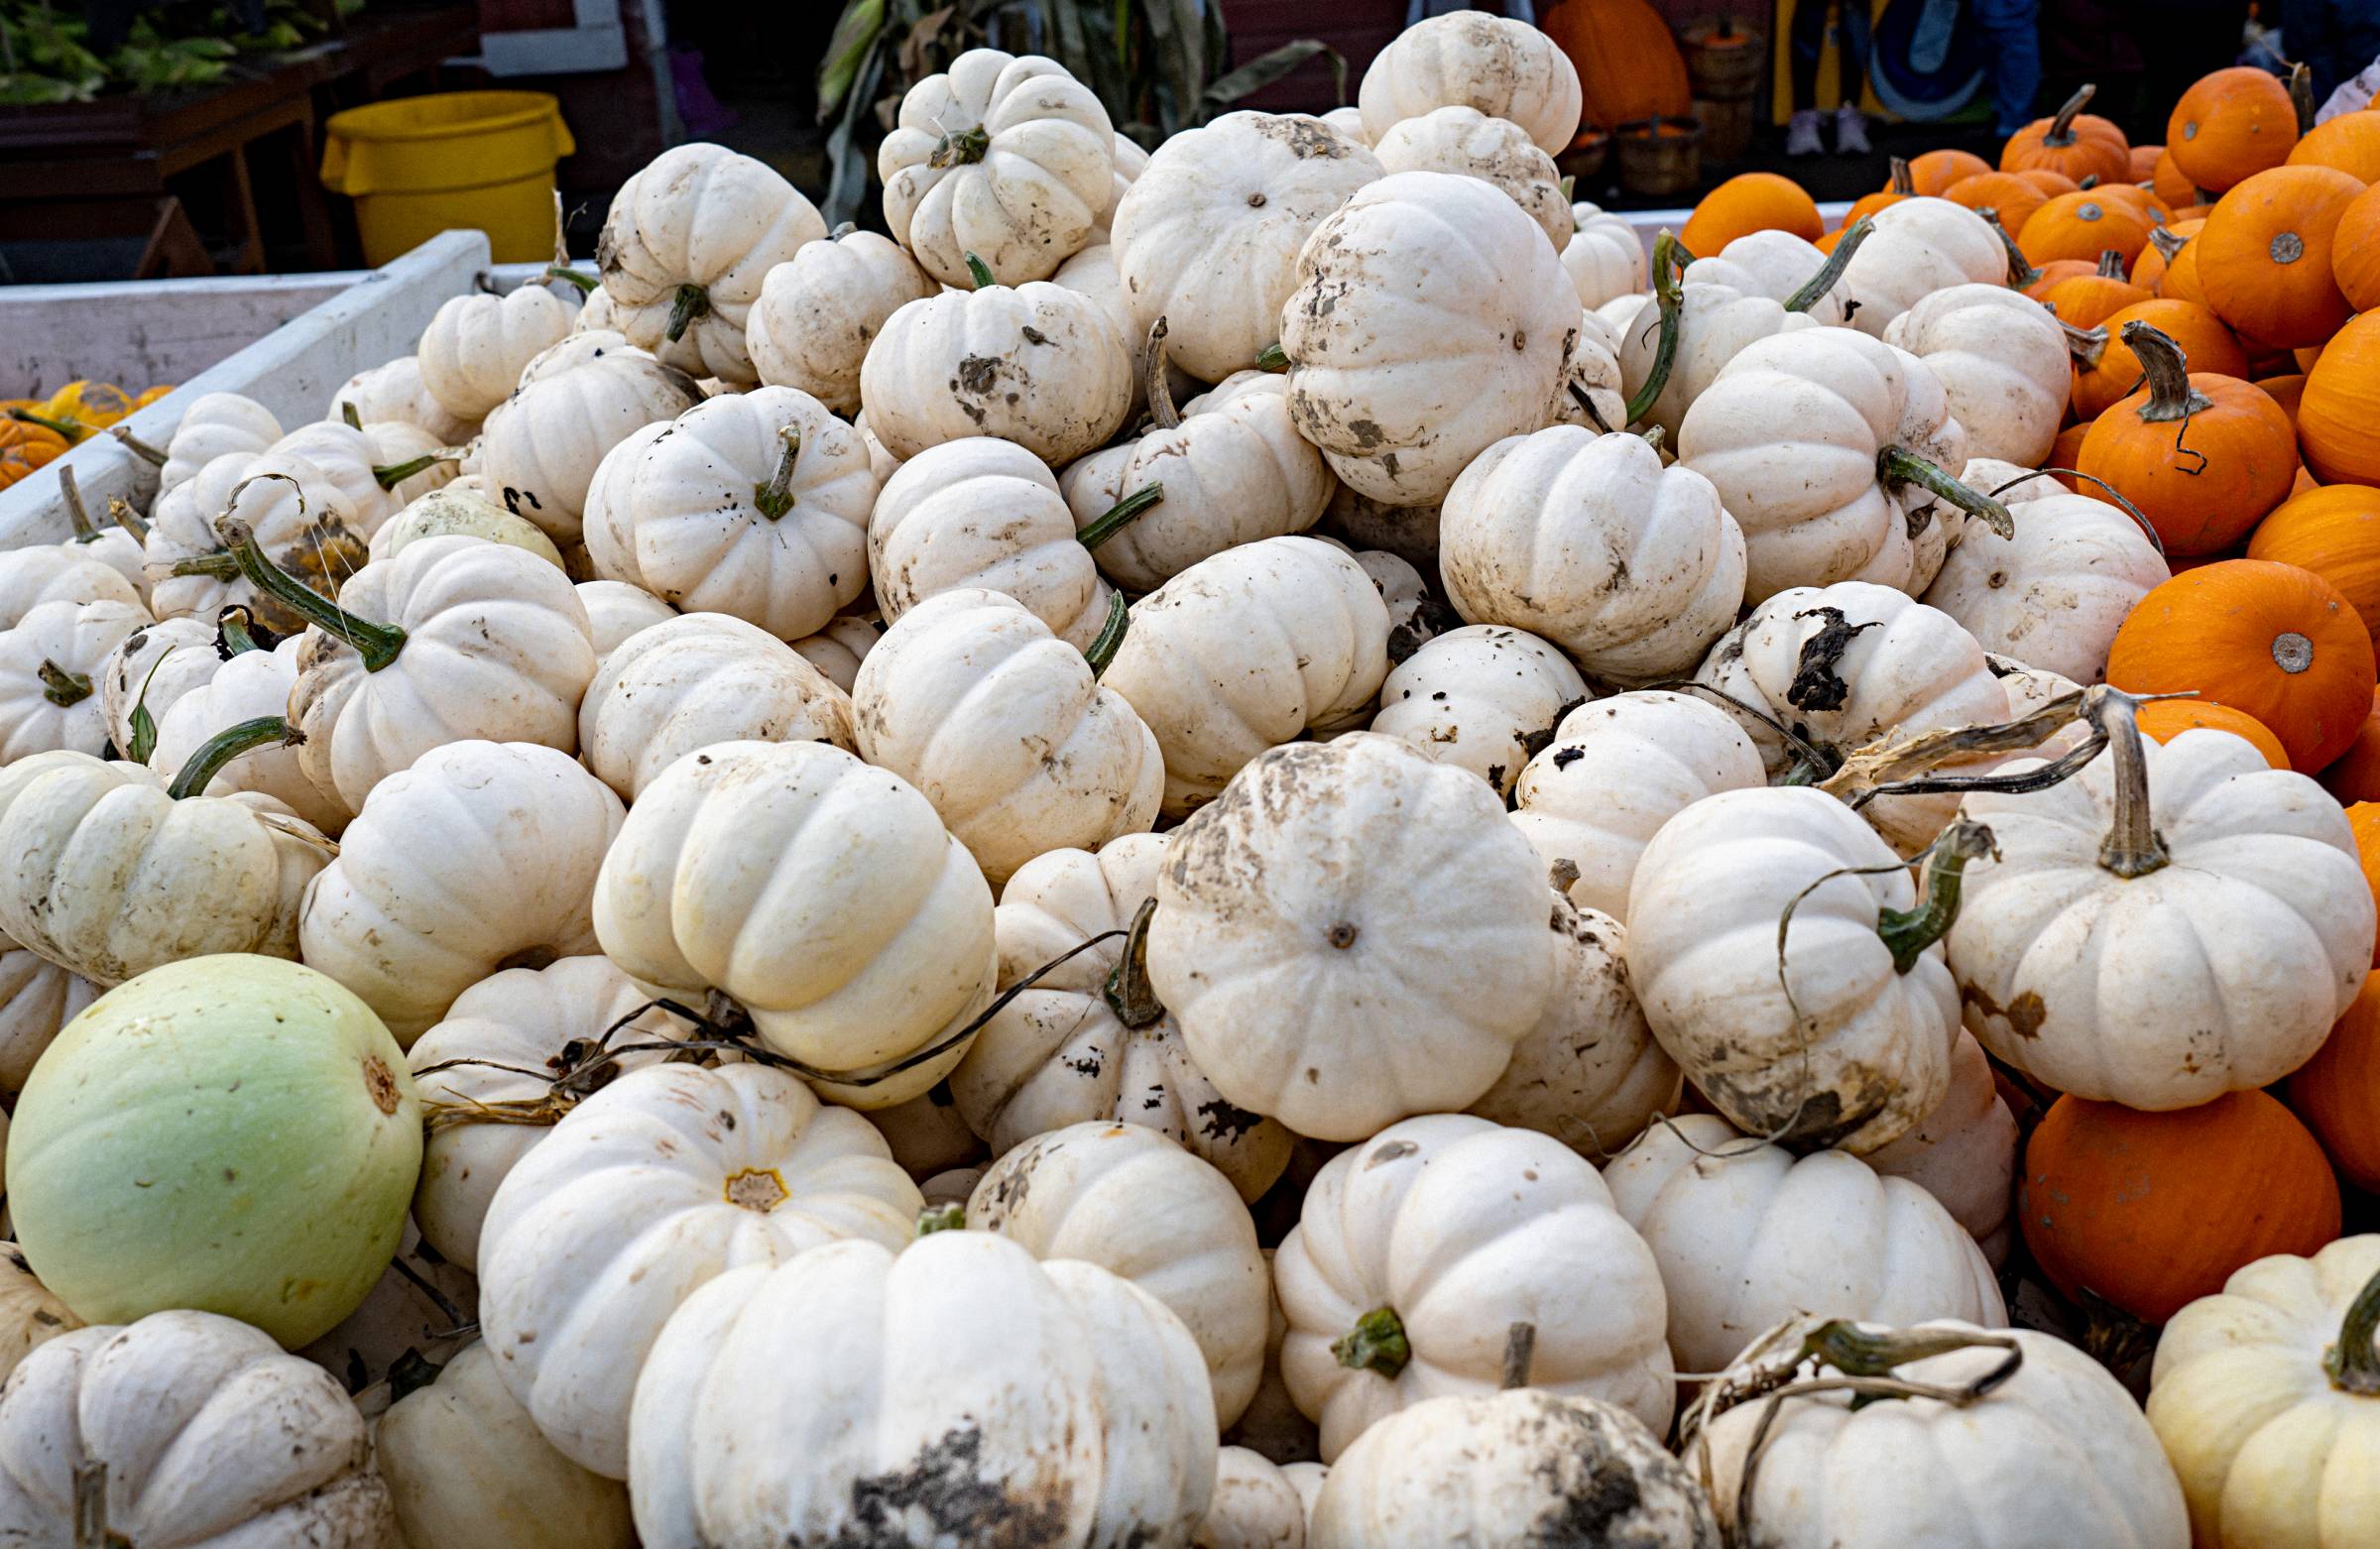 a variety of pumpkins in a market